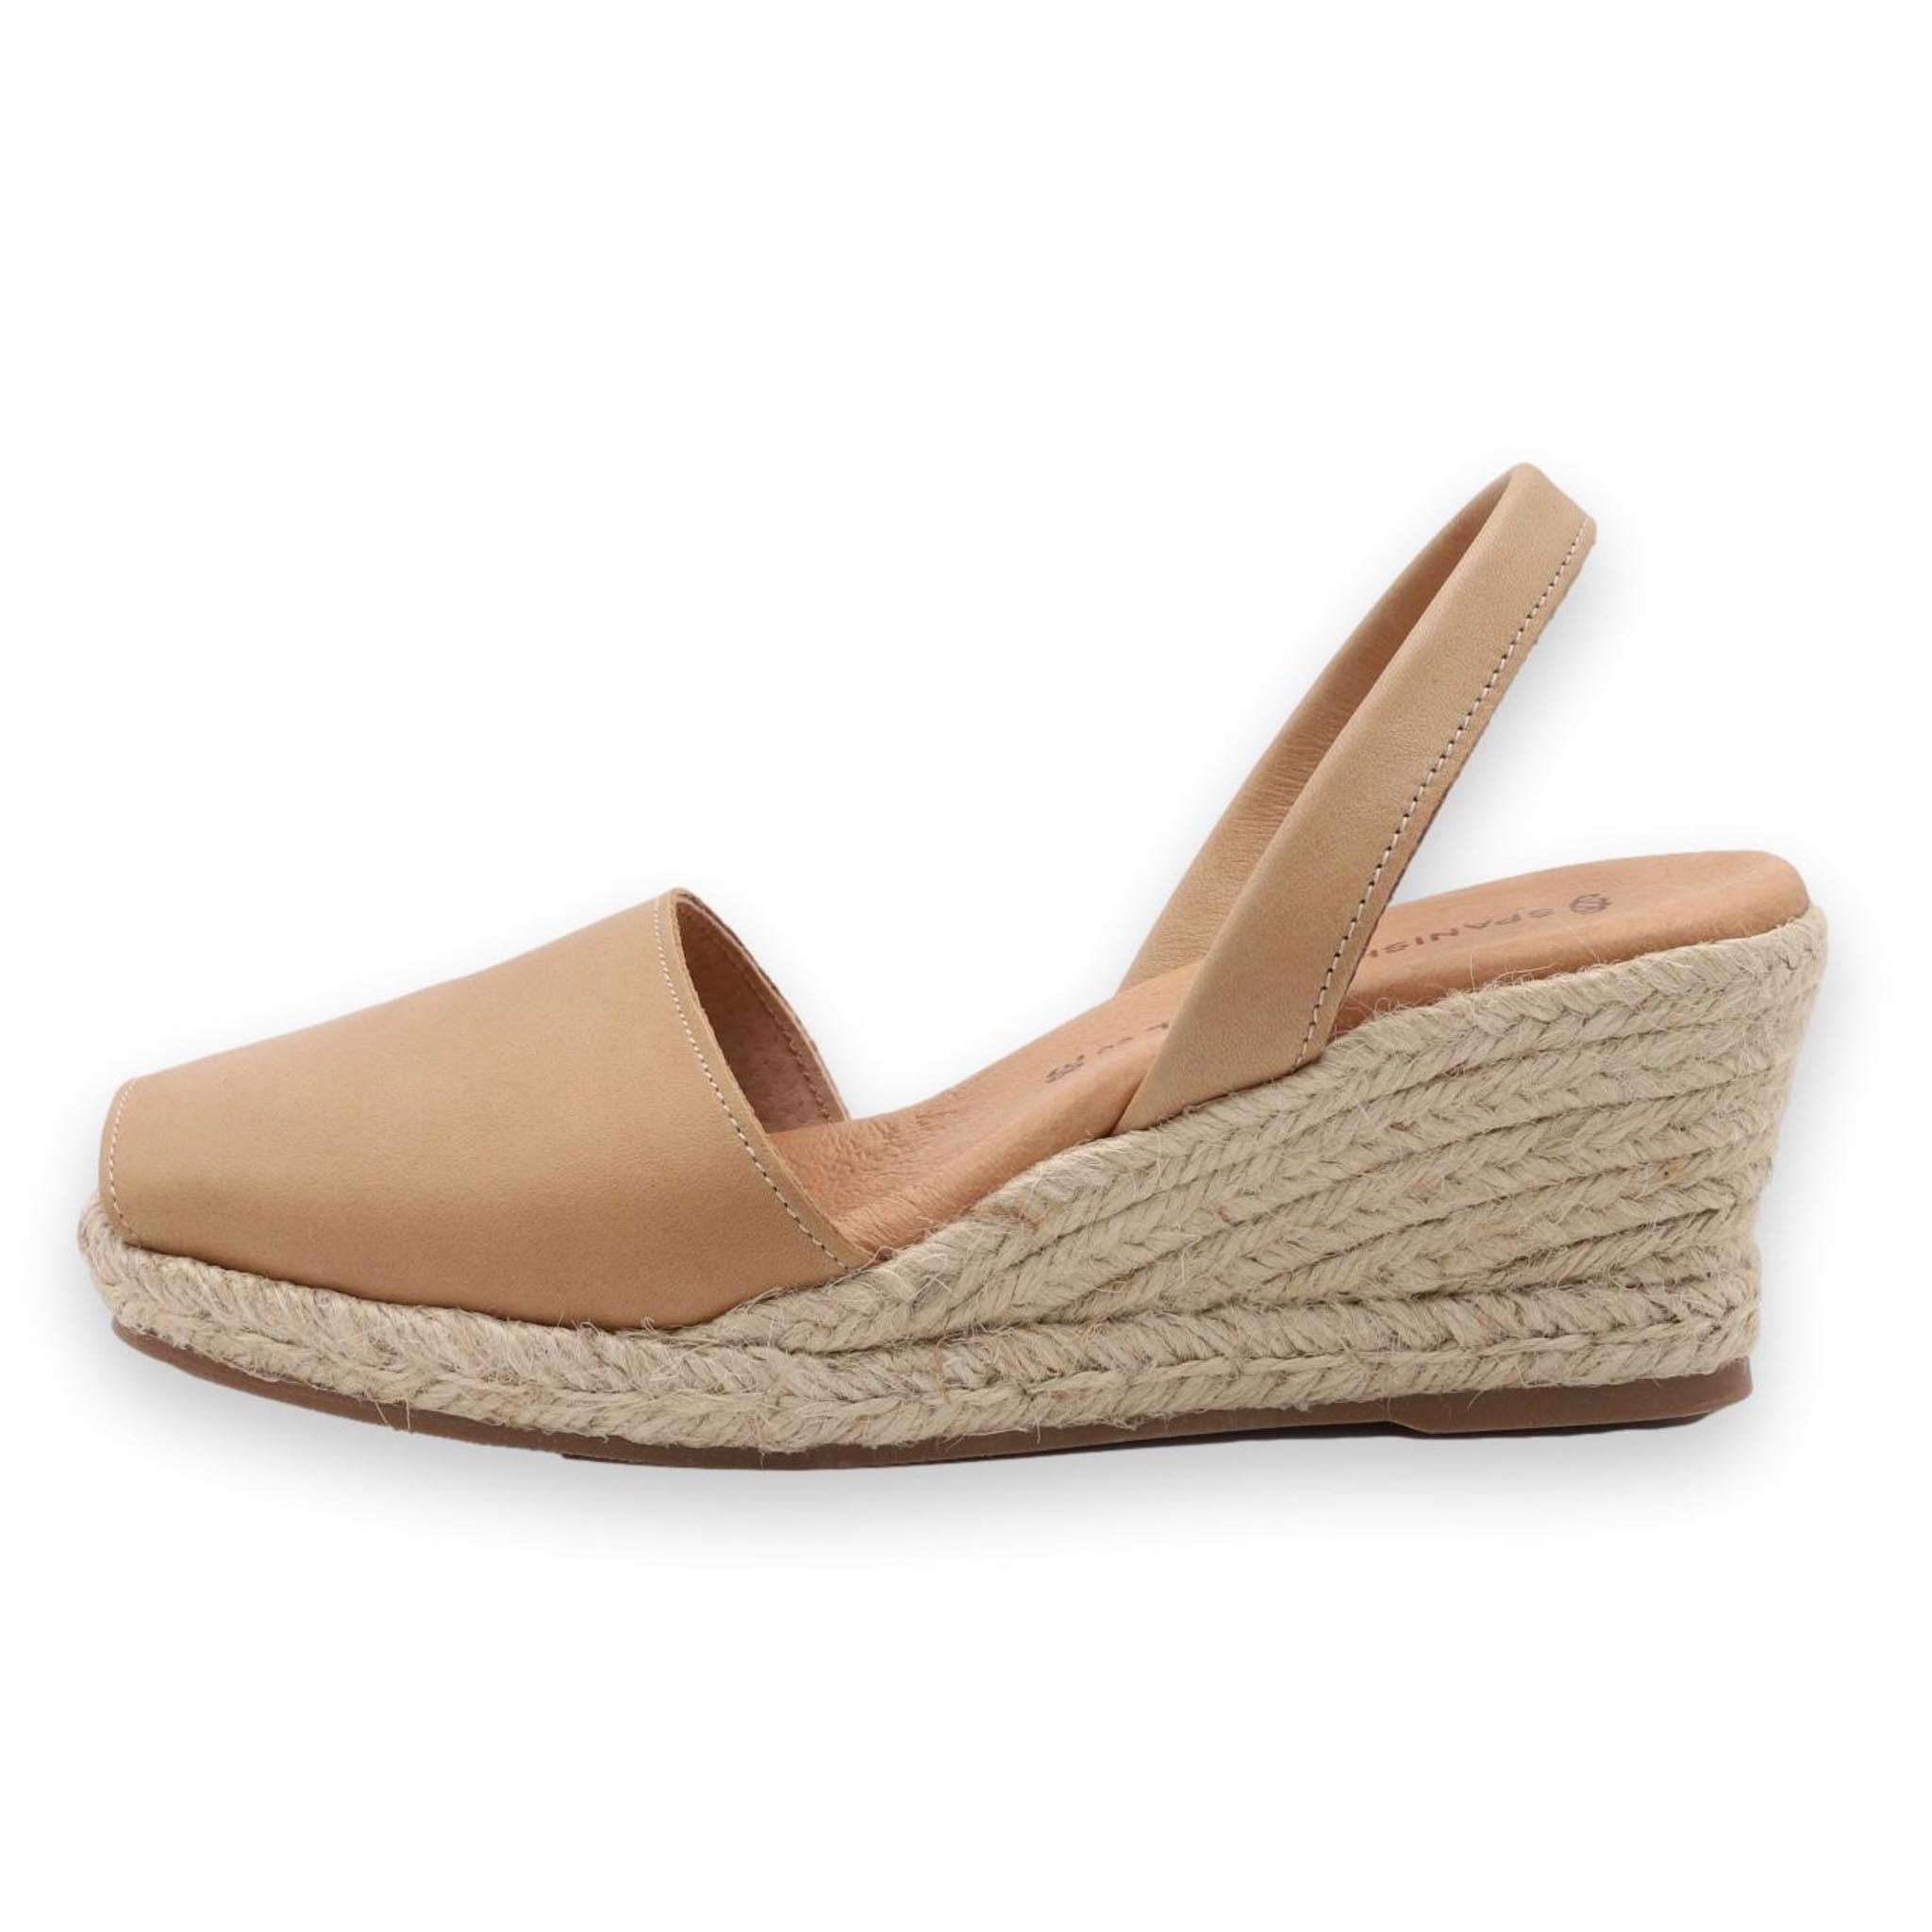 profile view of almond espadrille wedge